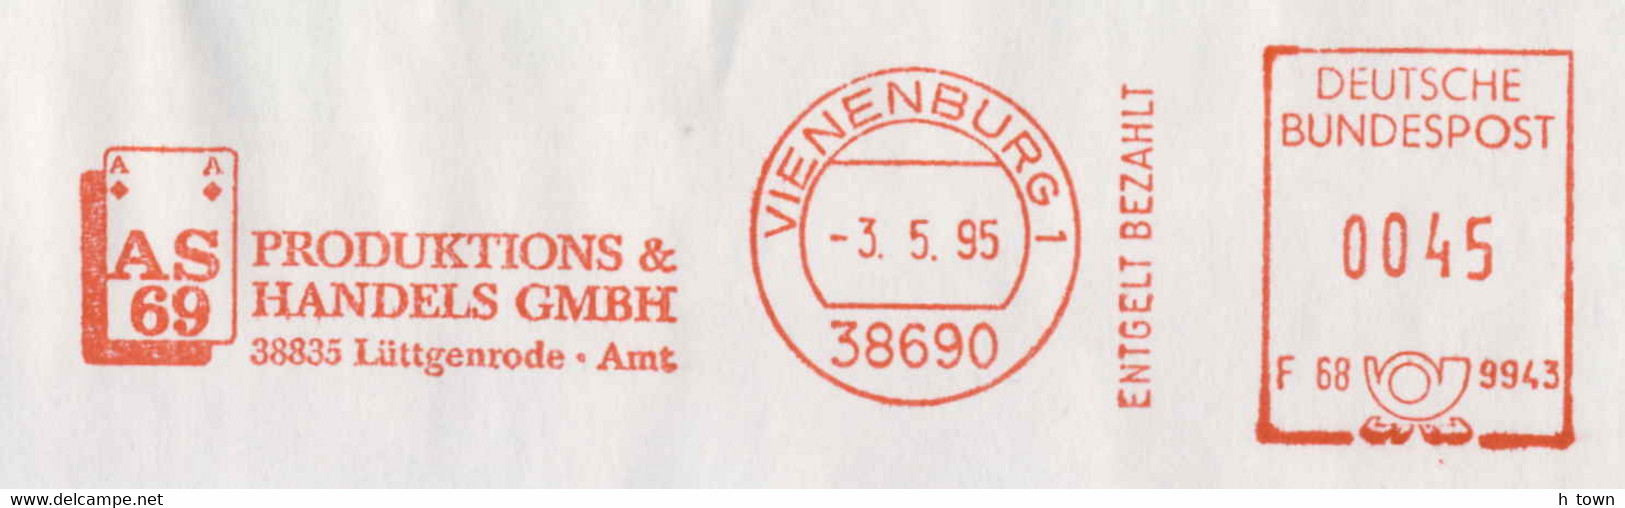 931  Jeu De Cartes: Ema D'Allemagne, 1995 - Playing Card Meter Stamp From Vienenburg, Germany. Ace AS 69 - Non Classés